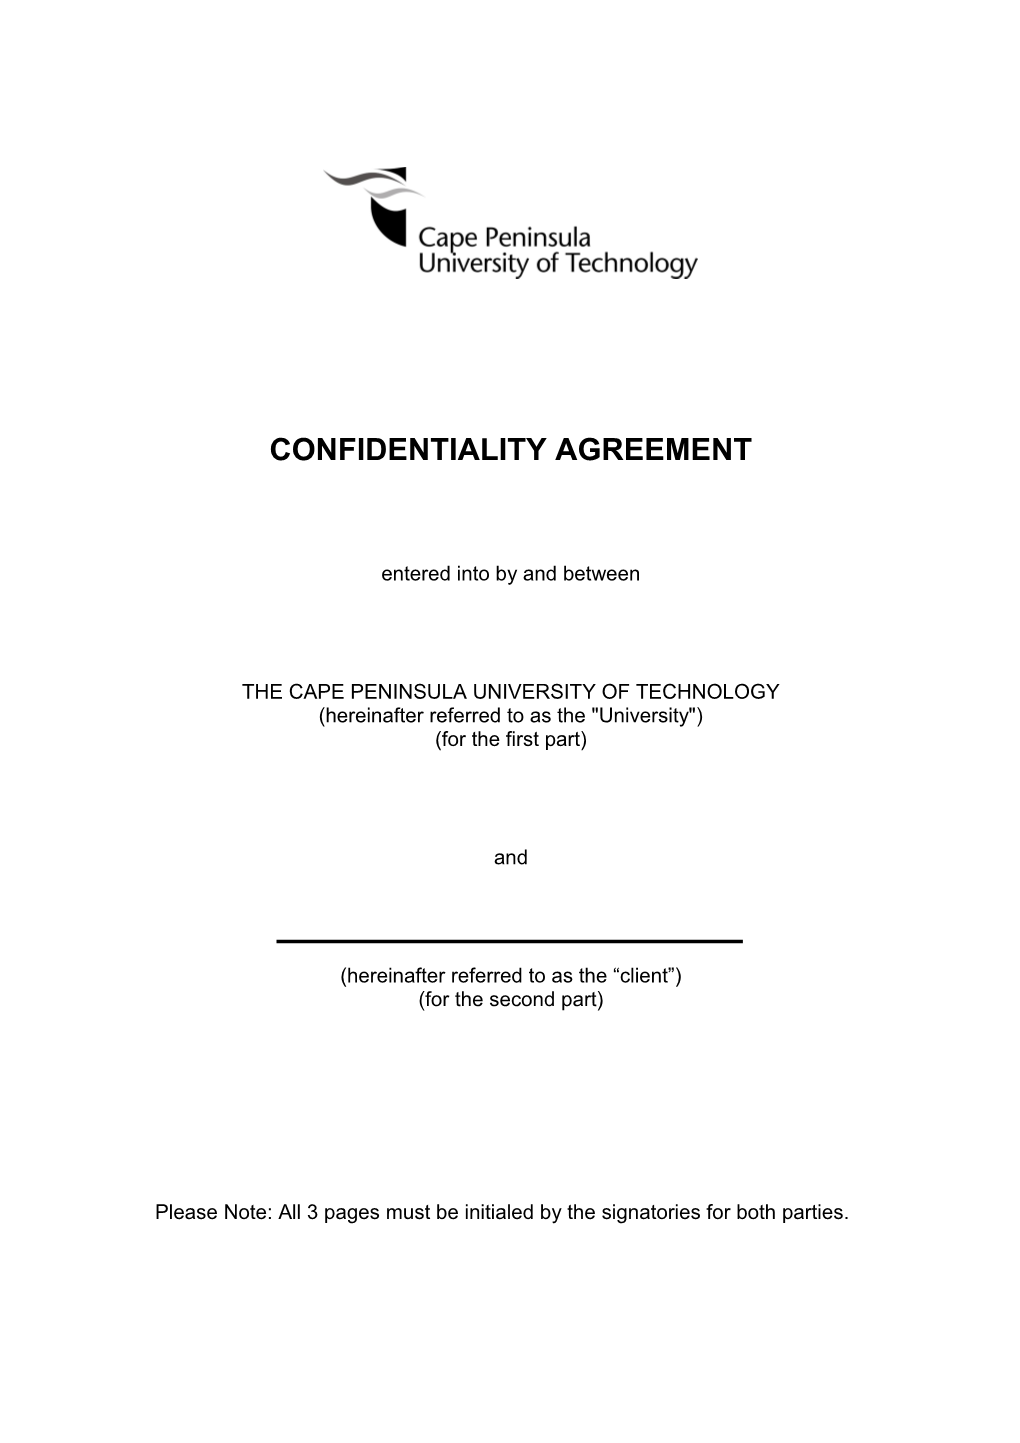 Confidentiality Agreement s2